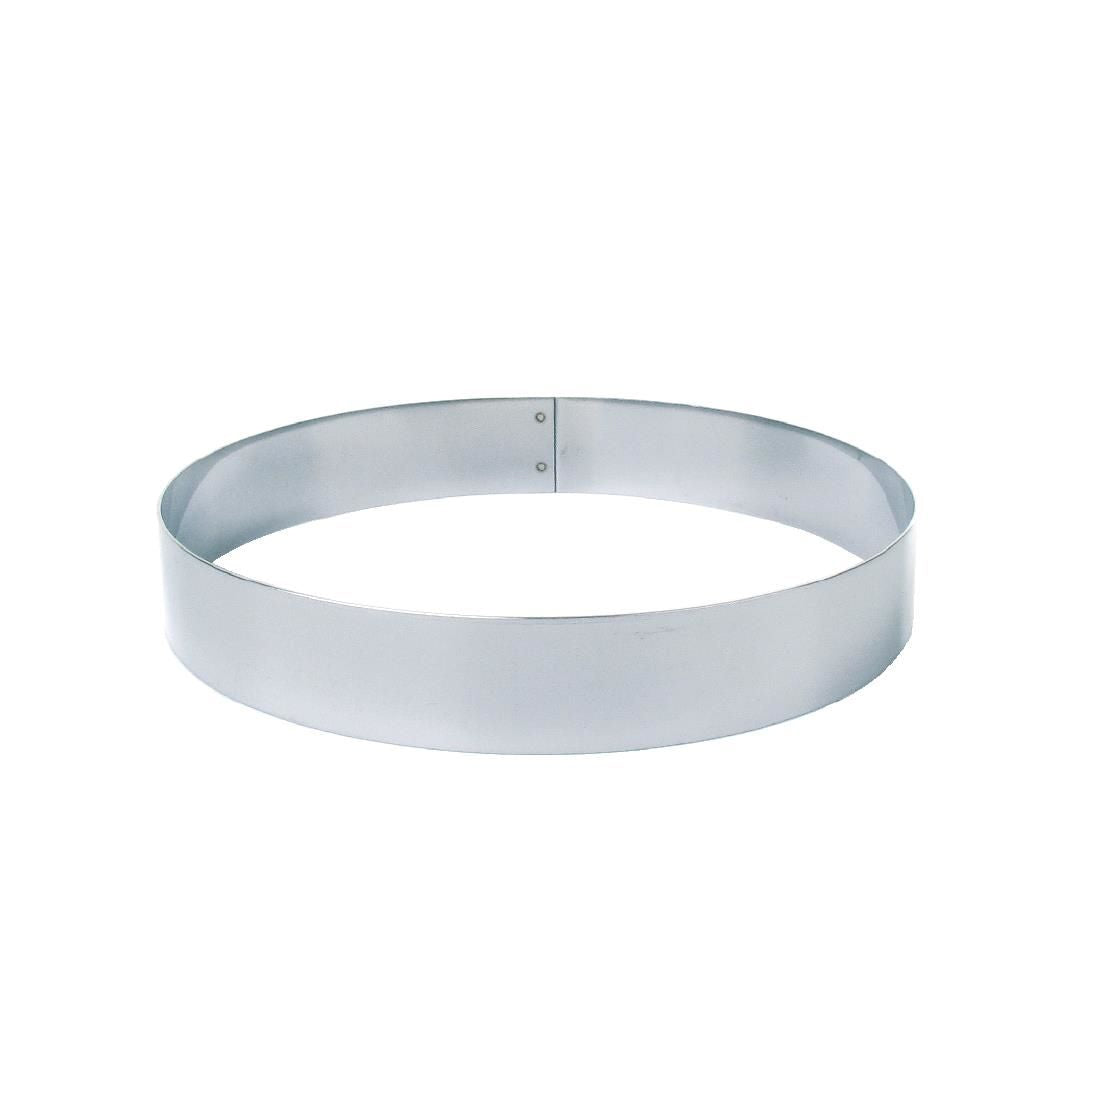 DN959 Matfer Bourgeat Stainless Steel Mousse Ring 45 x 240mm JD Catering Equipment Solutions Ltd